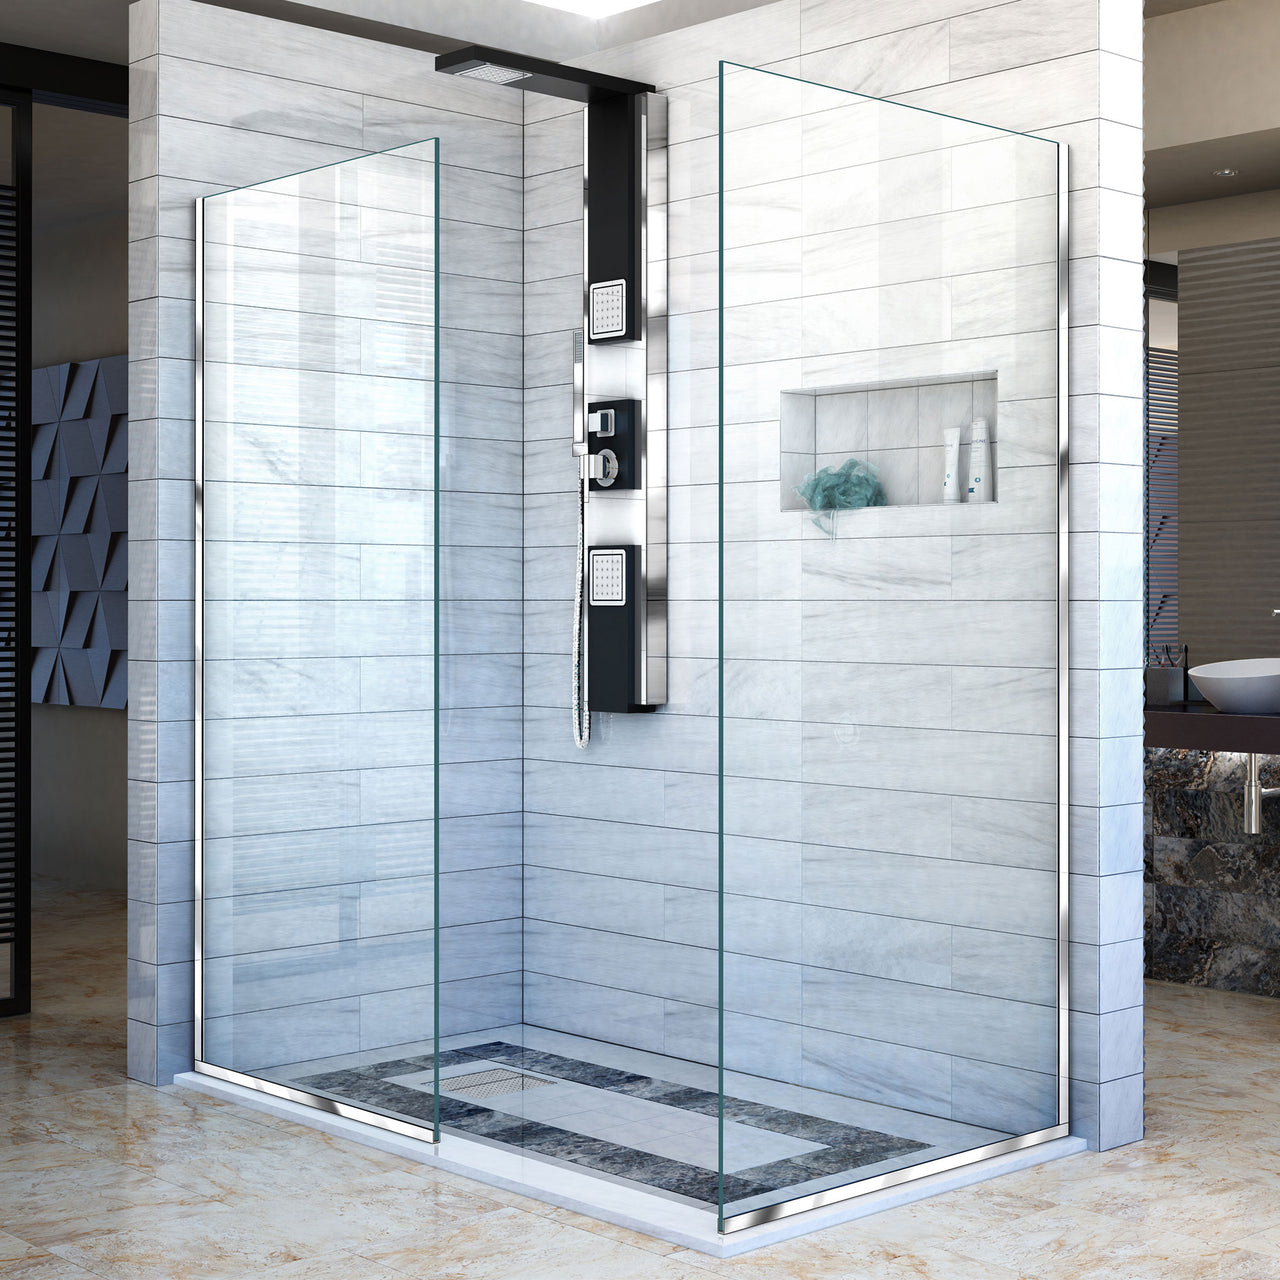 DreamLine Linea Two Individual Frameless Shower Screens 34 in. W x 72 in. H each, Open Entry Design - BNGBath